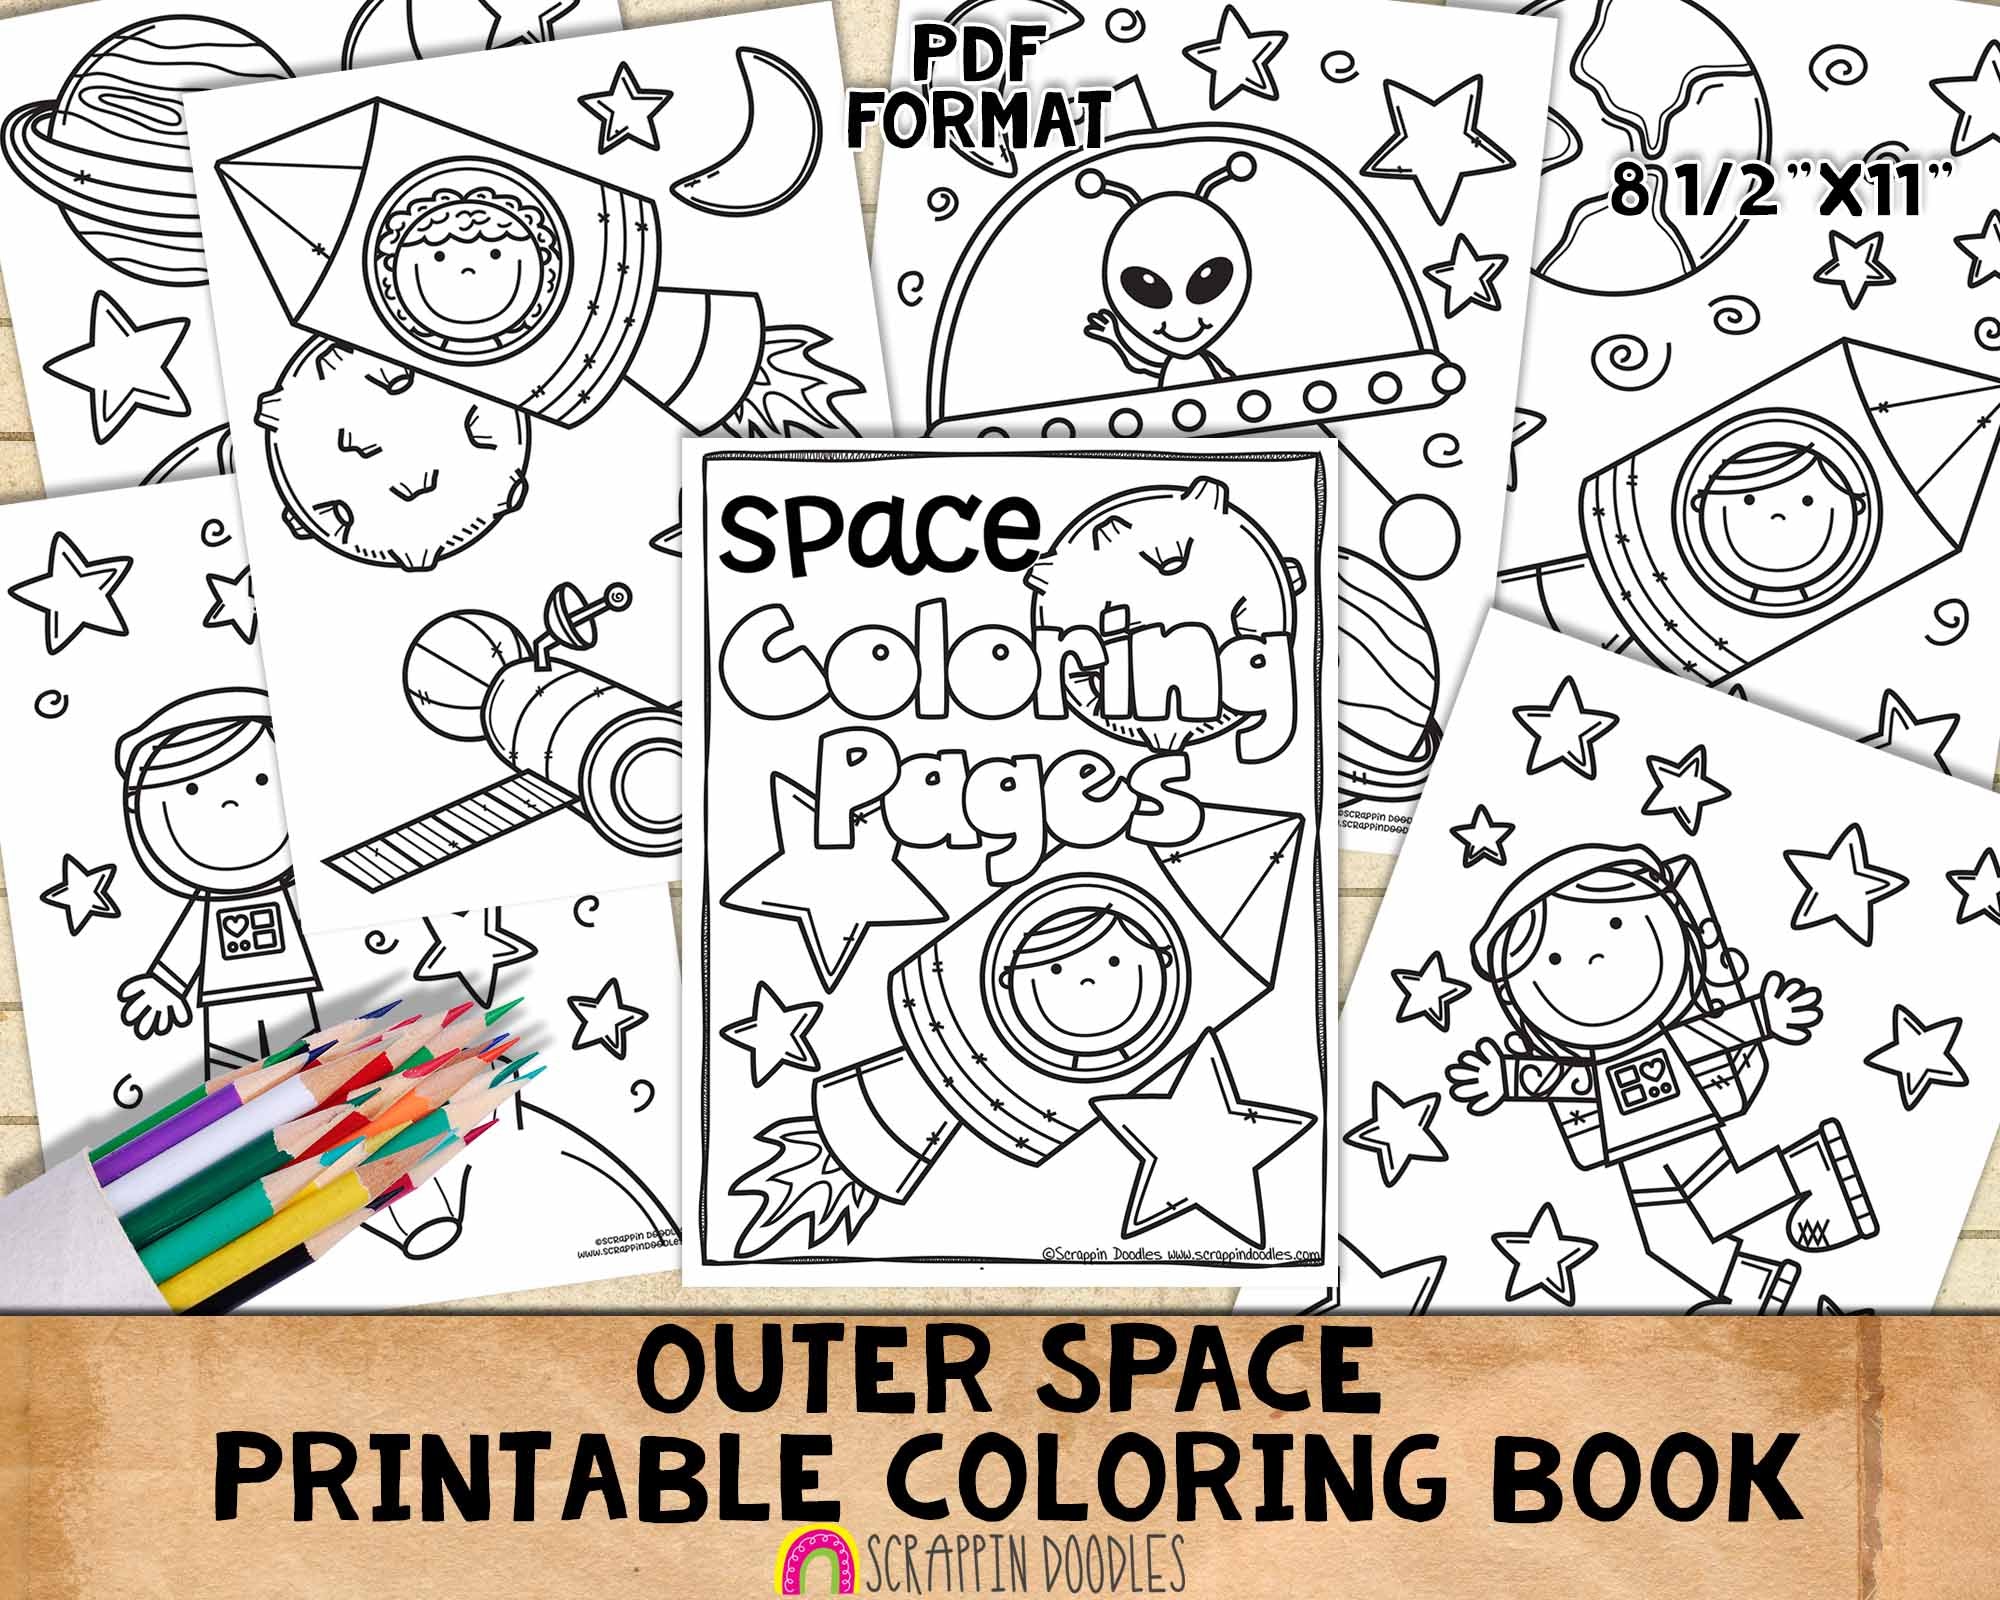 doodle art coloring pages pictures